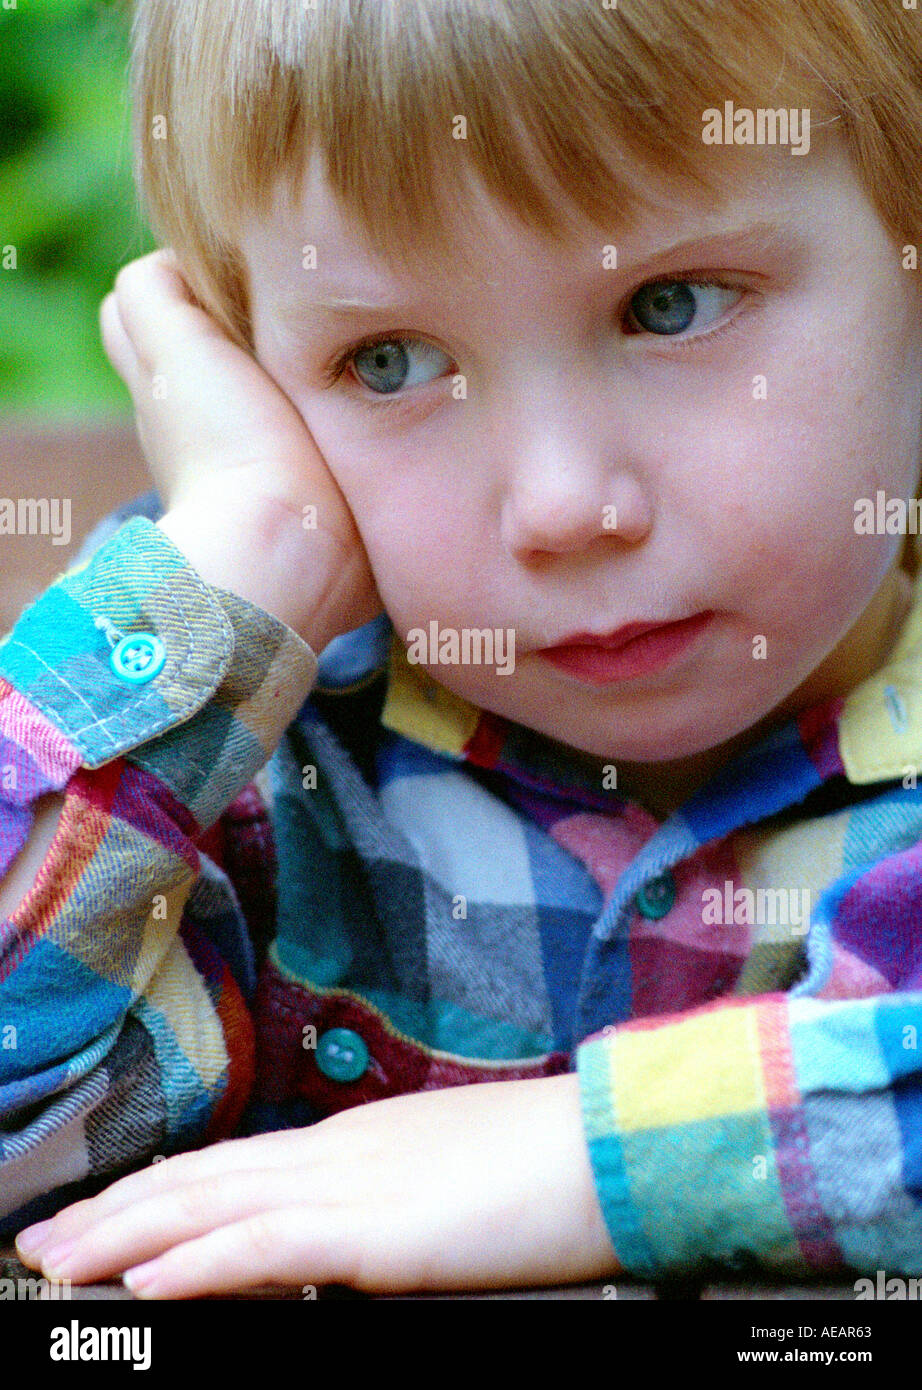 Young boy deep in thought wearing a chequered shirt Stock Photo